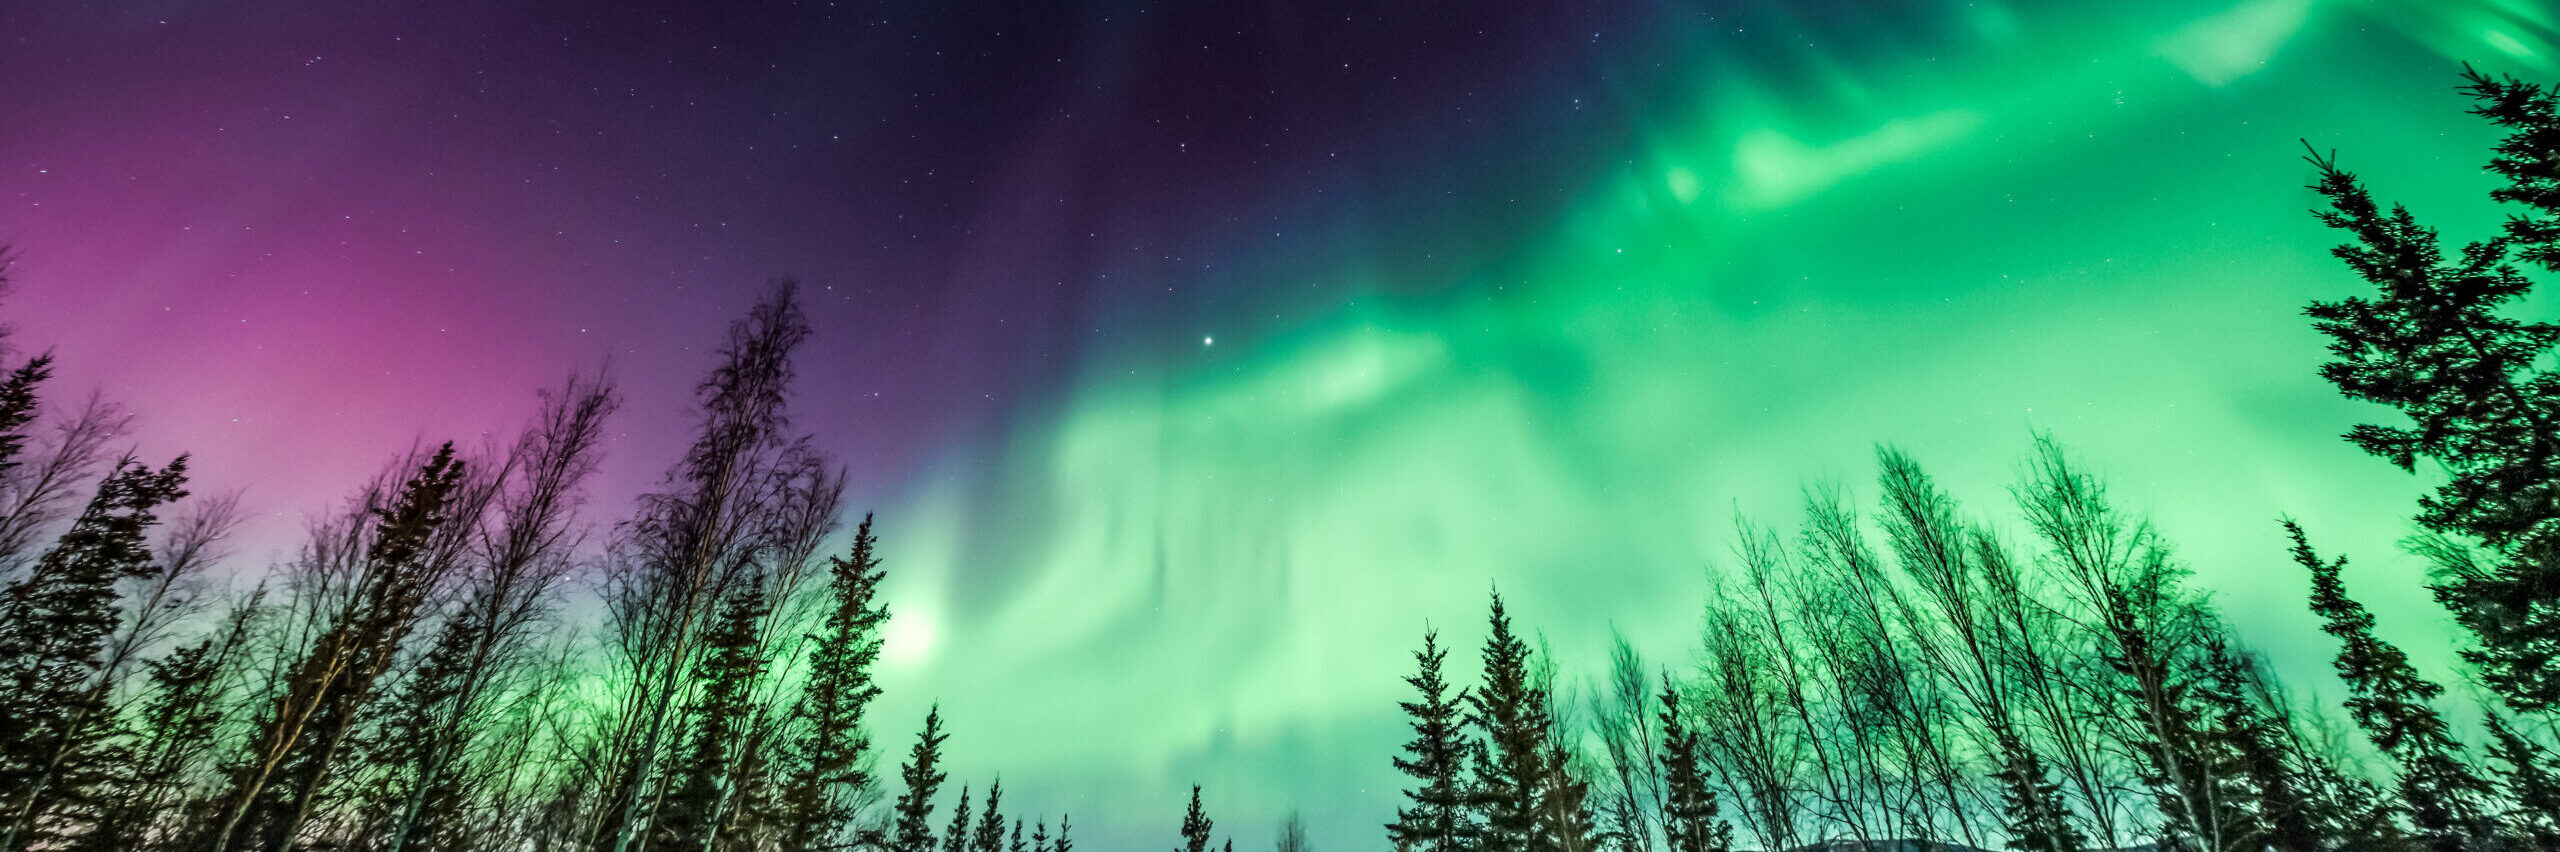 Purple and green Northern Lights in wave pattern over trees [shutterstock]